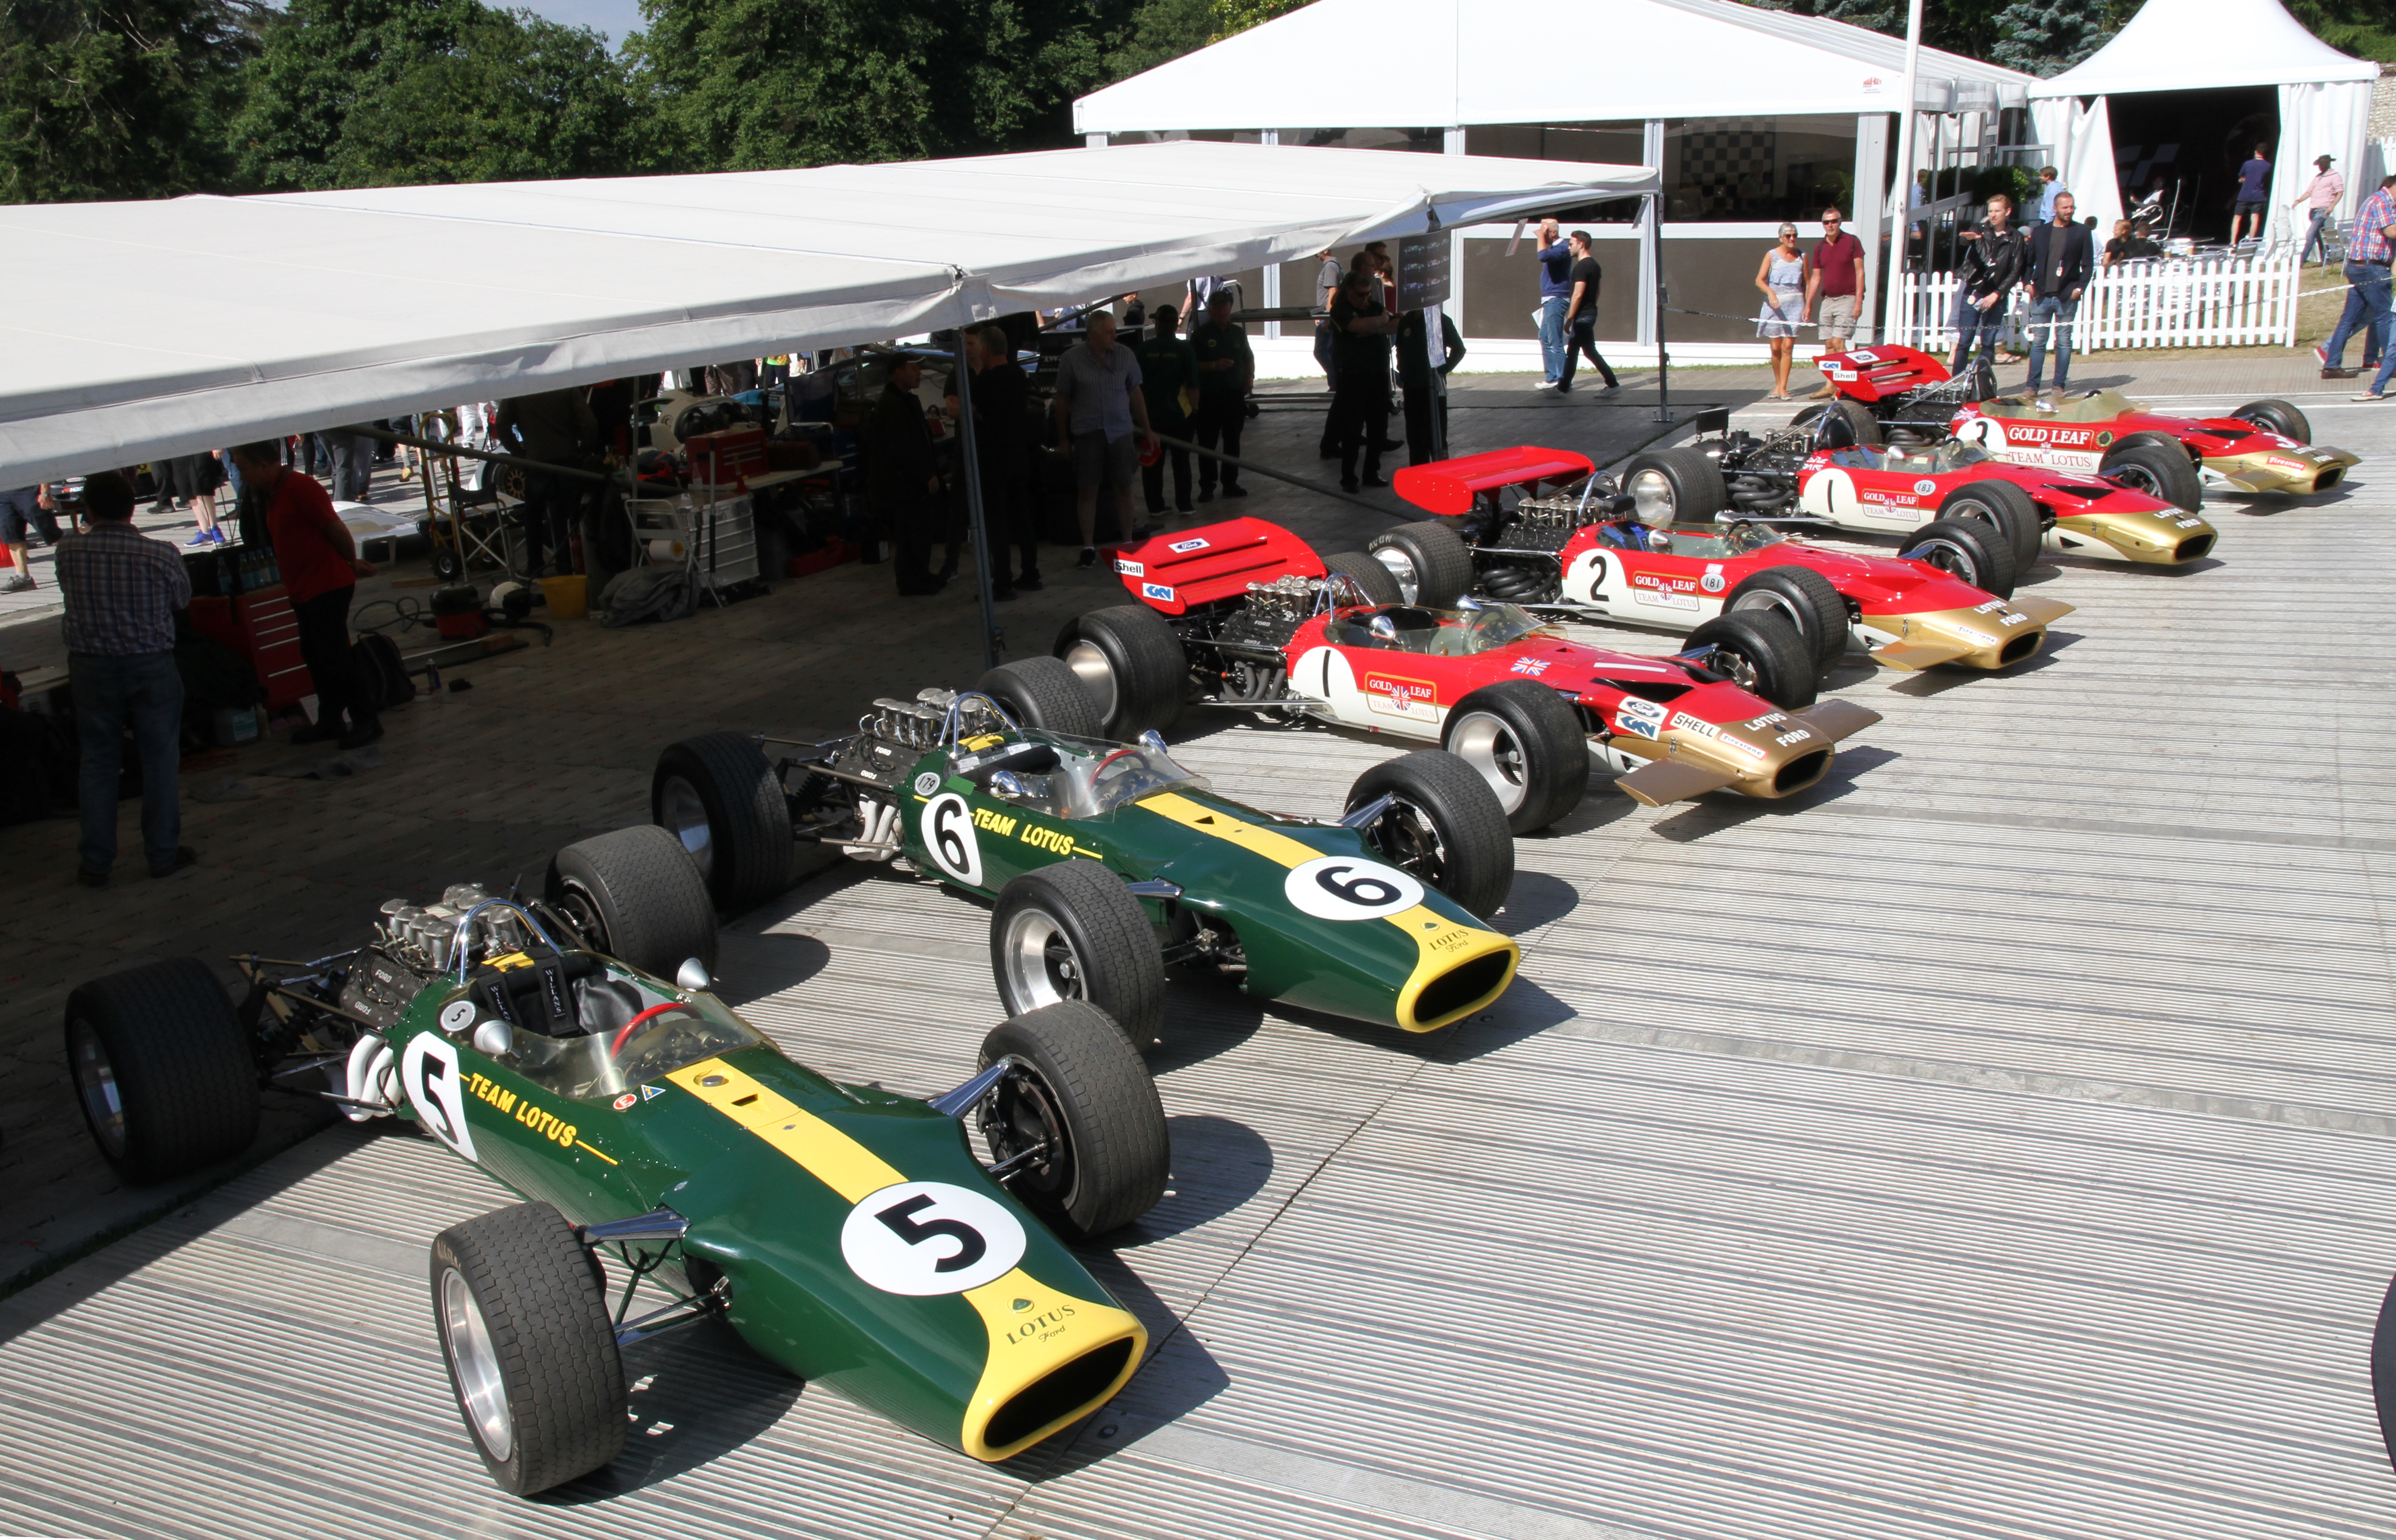 Classic Team Lotus at Goodwood Festival of Speed 2017